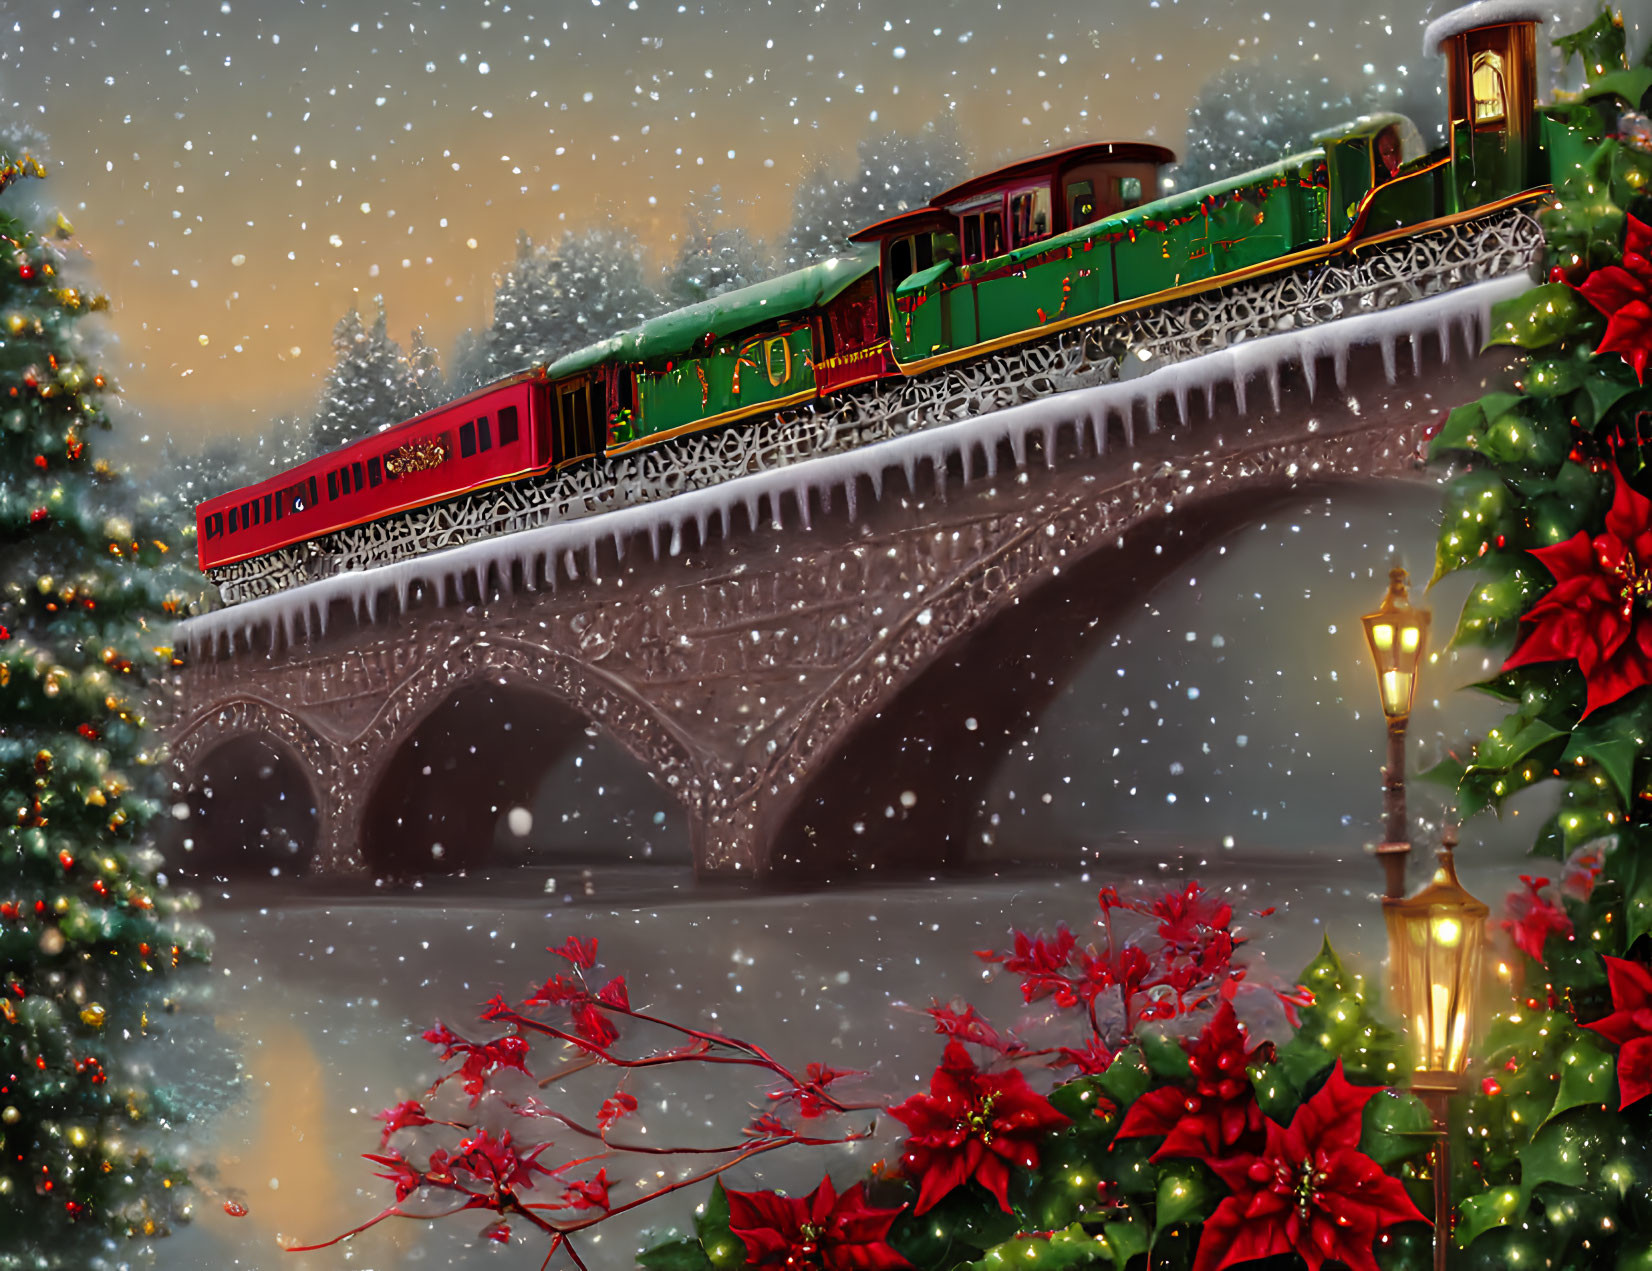 Vintage train crossing snow-covered bridge with Christmas decorations and poinsettias in gentle snowfall at dusk